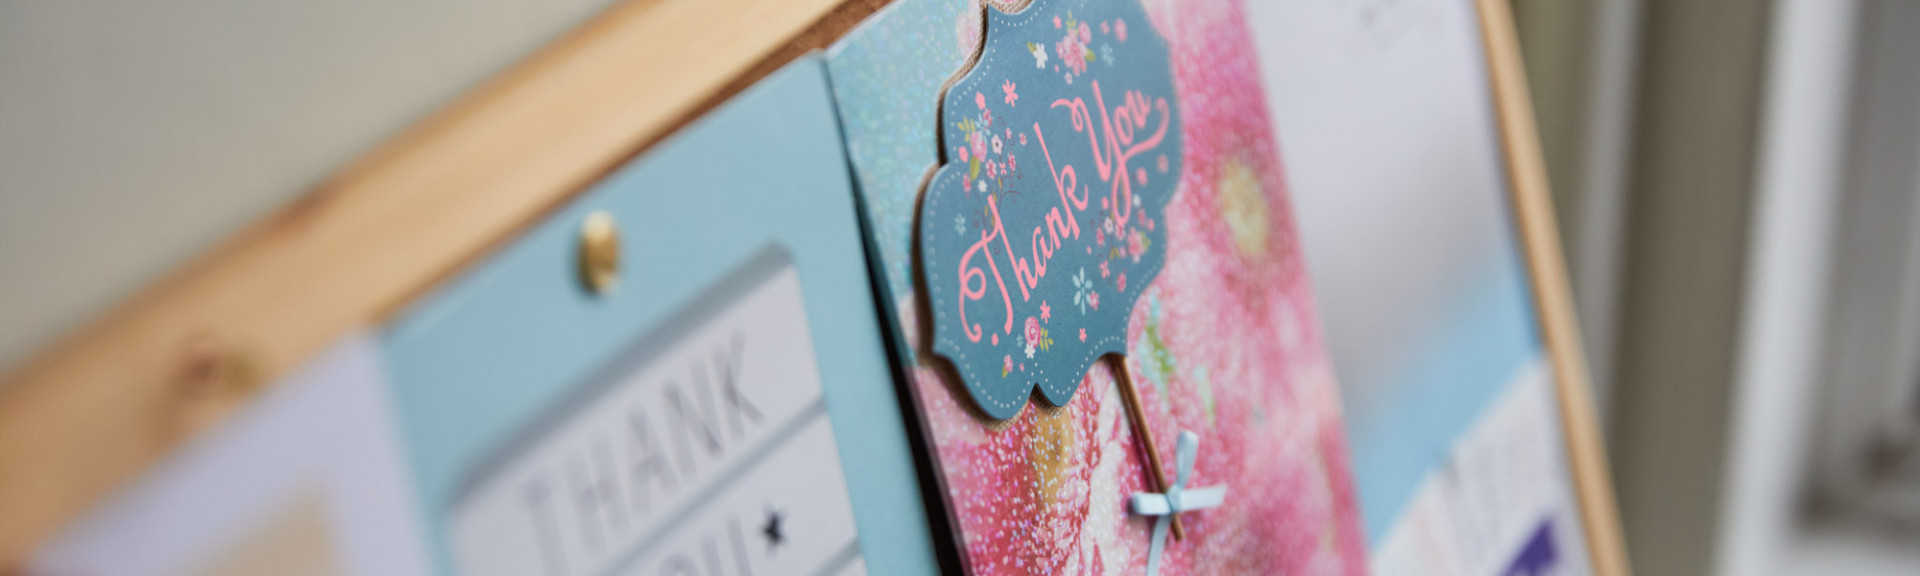 A photo showing a pin board full of thankyou cards